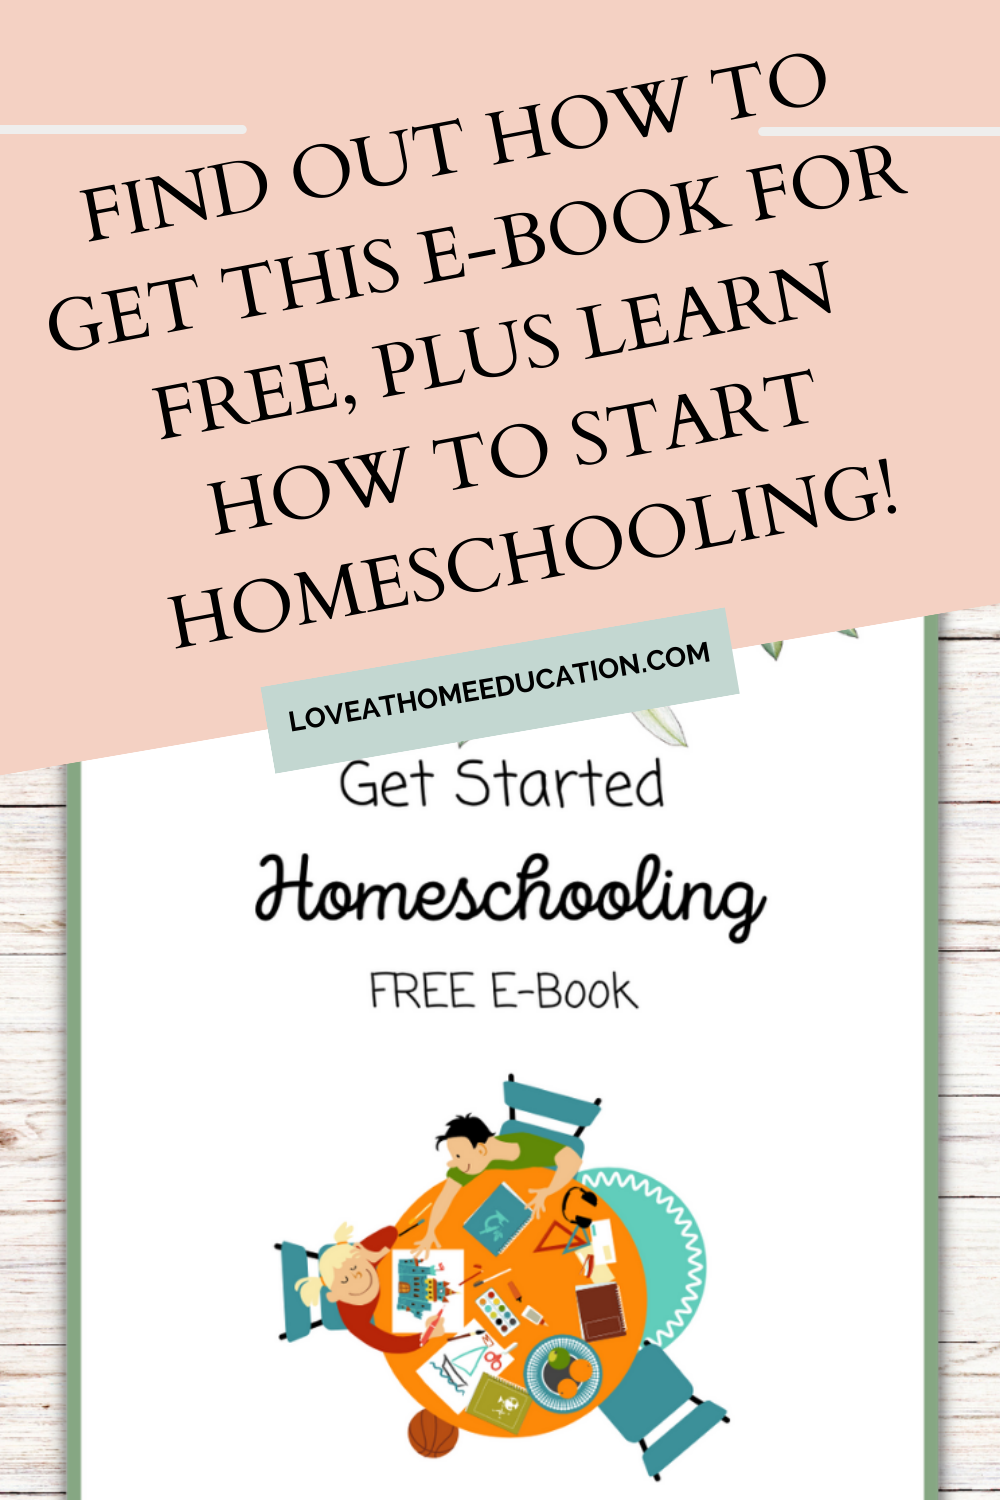 How to Get Started Homeschooling (And how to get our FREE E-Book)